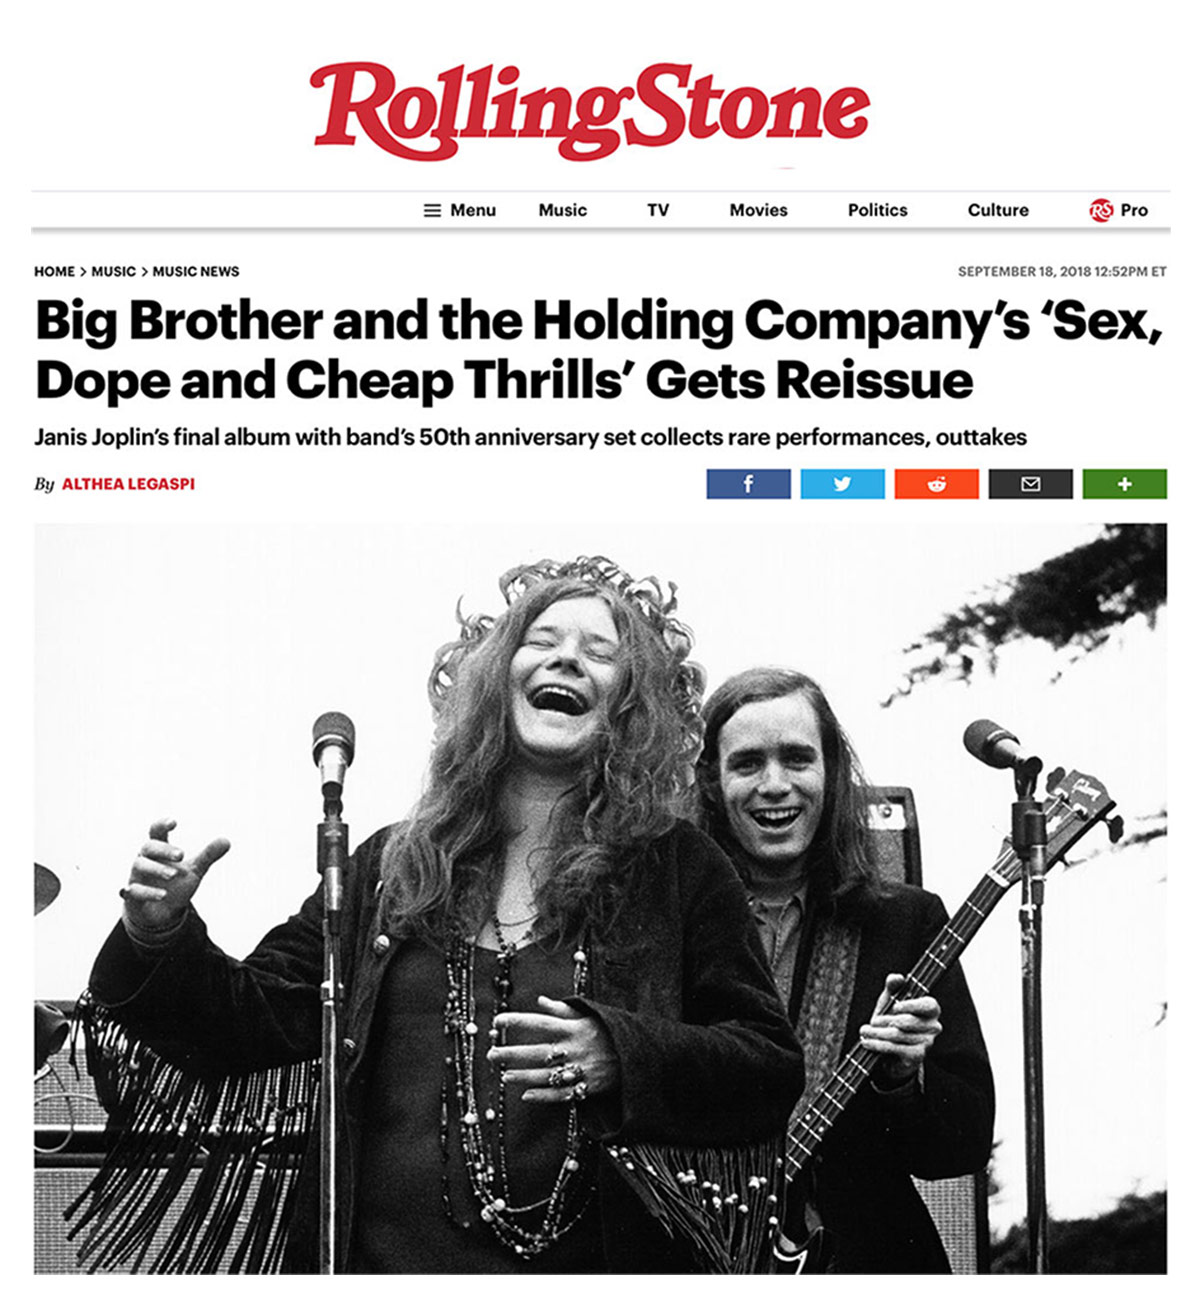 Sex & Cheap Thrills 190758635224 Big Brother and the Holding Company Janis Joplin Dope 